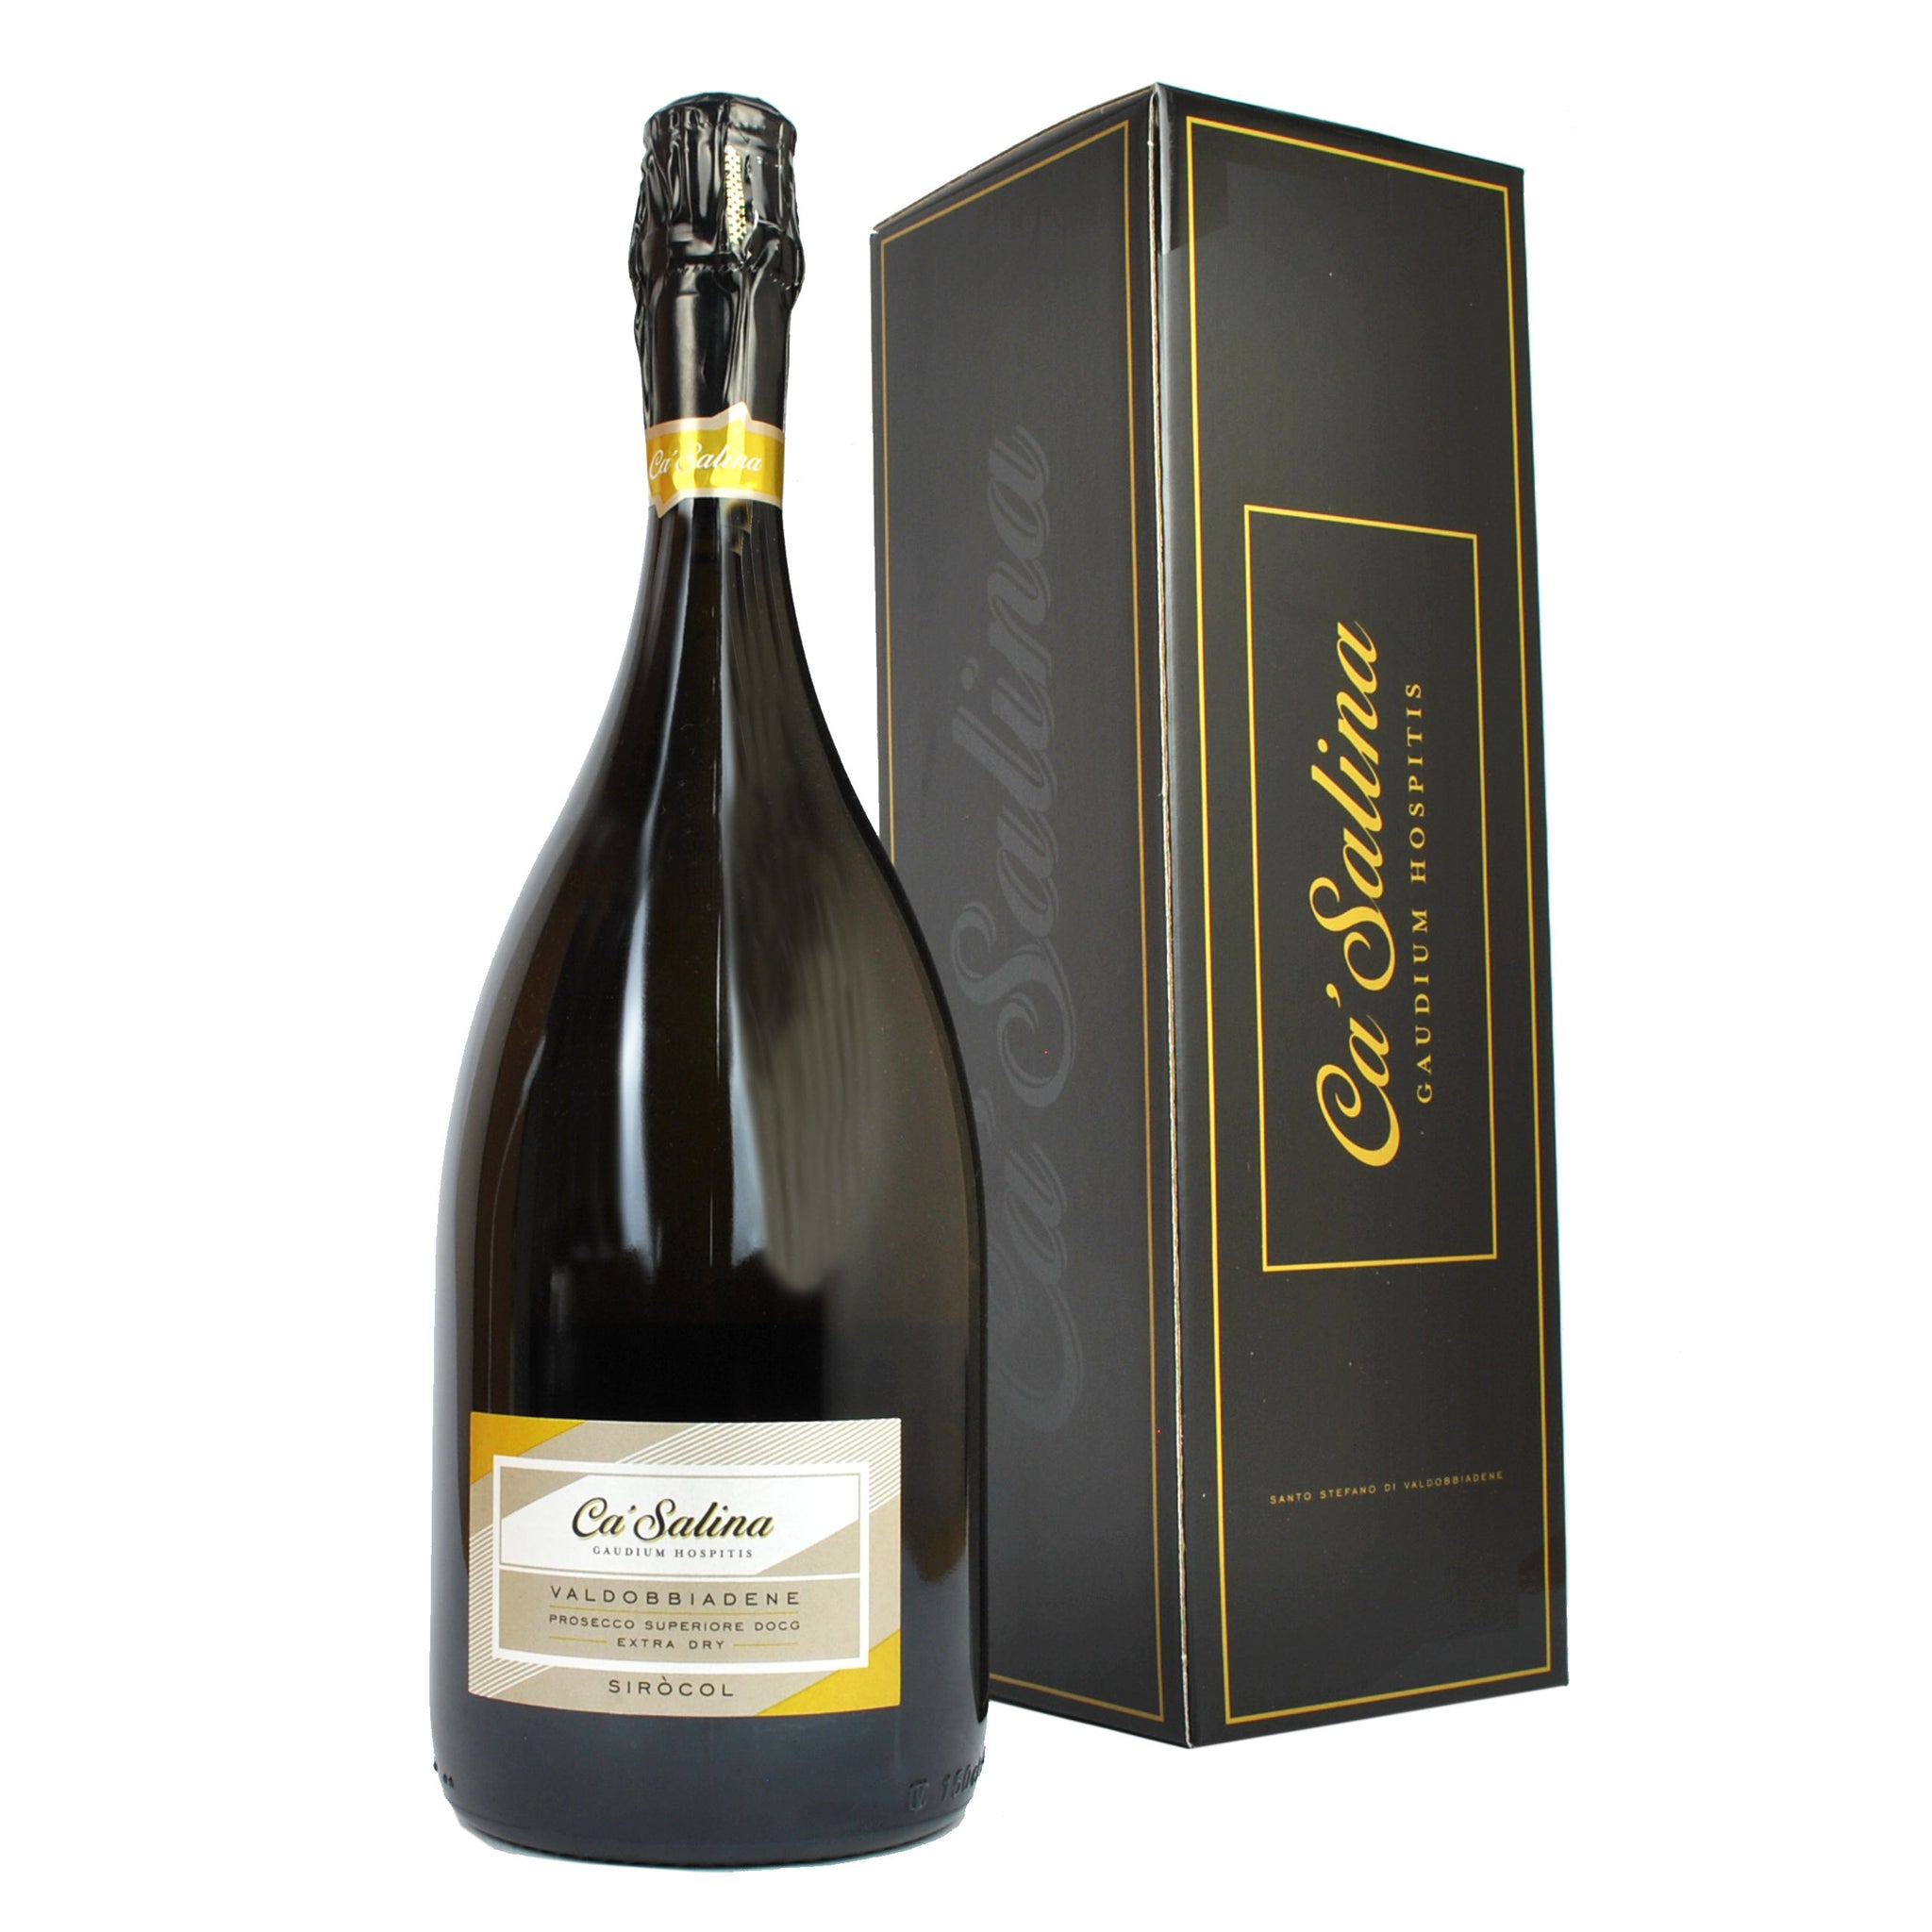 A large Magnum bottle of Ca'Salina Prosecco Superiore DOCG Sirocol Extra Dry in a Gift Box